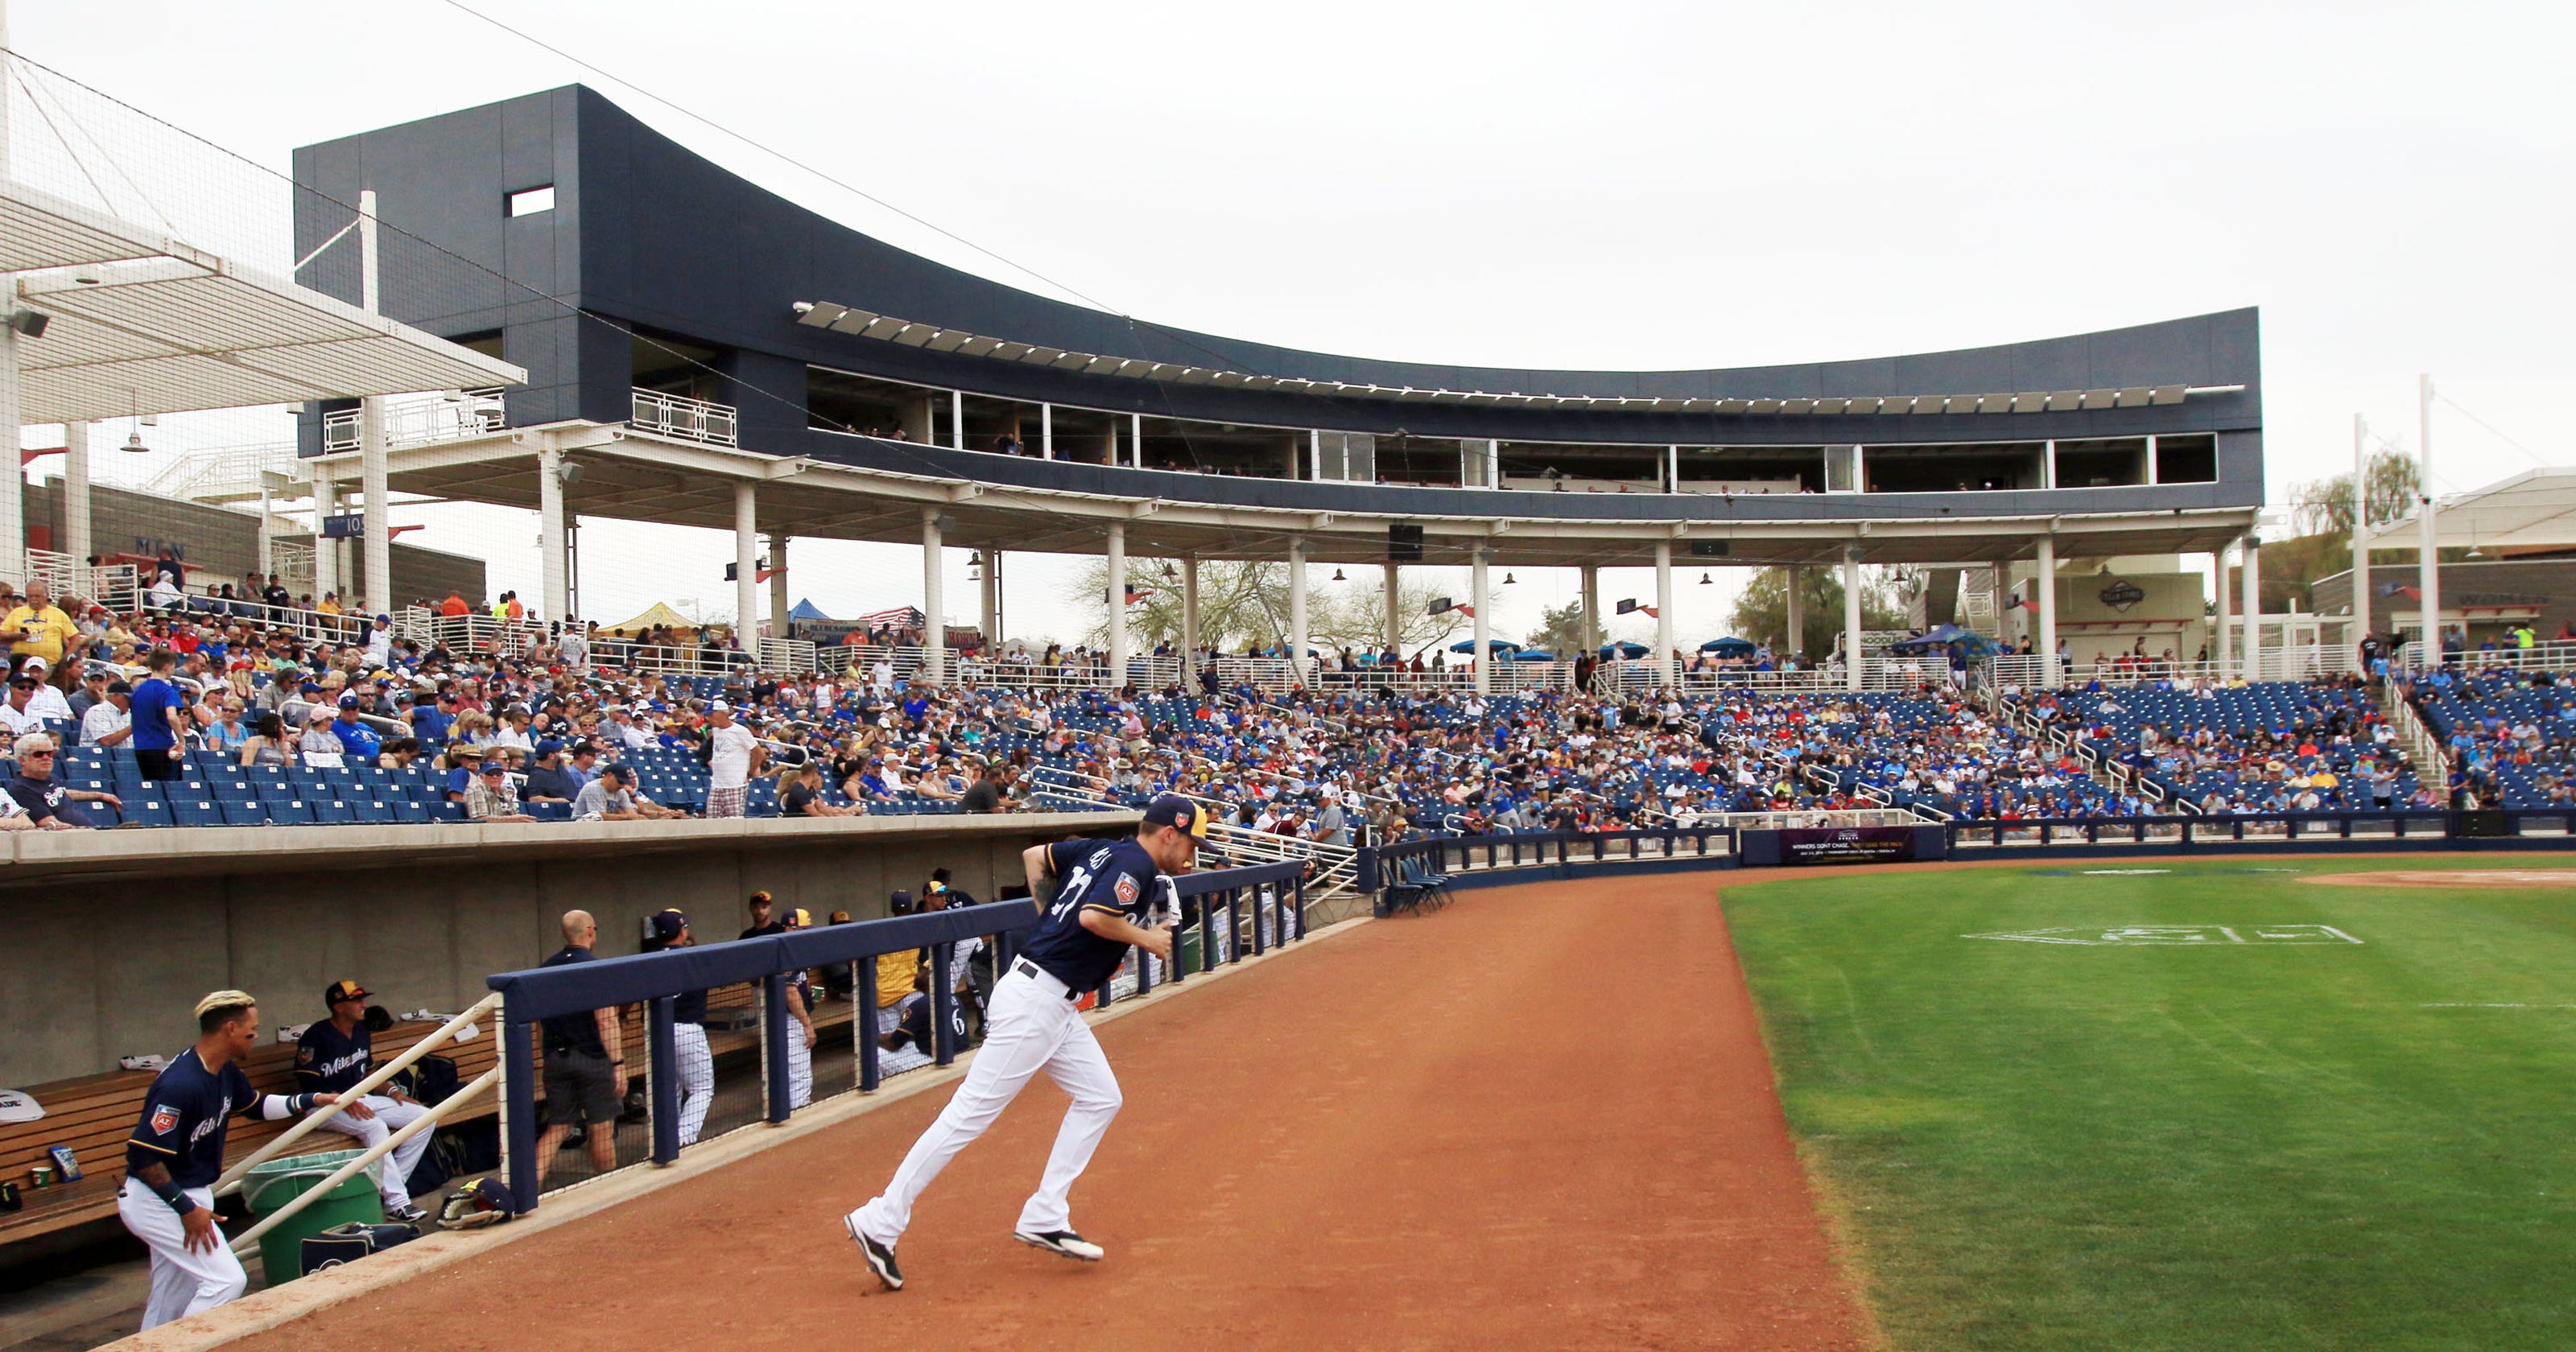 Ticket sales up sharply for Milwaukee Brewers spring training games